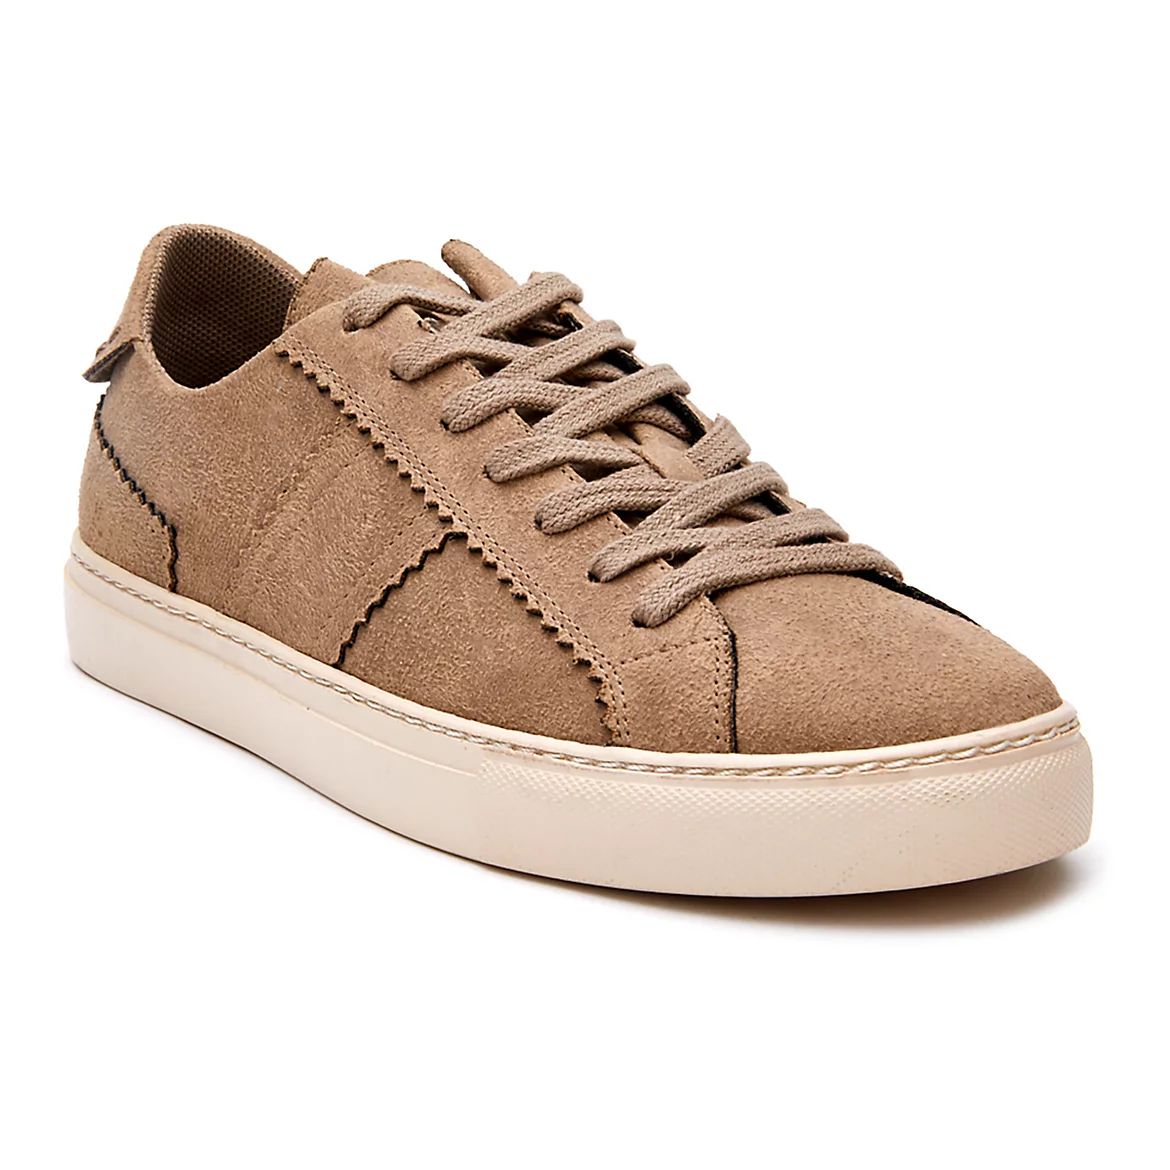 Coconuts by Matisse Clifton Women's Sneakers | Kohl's